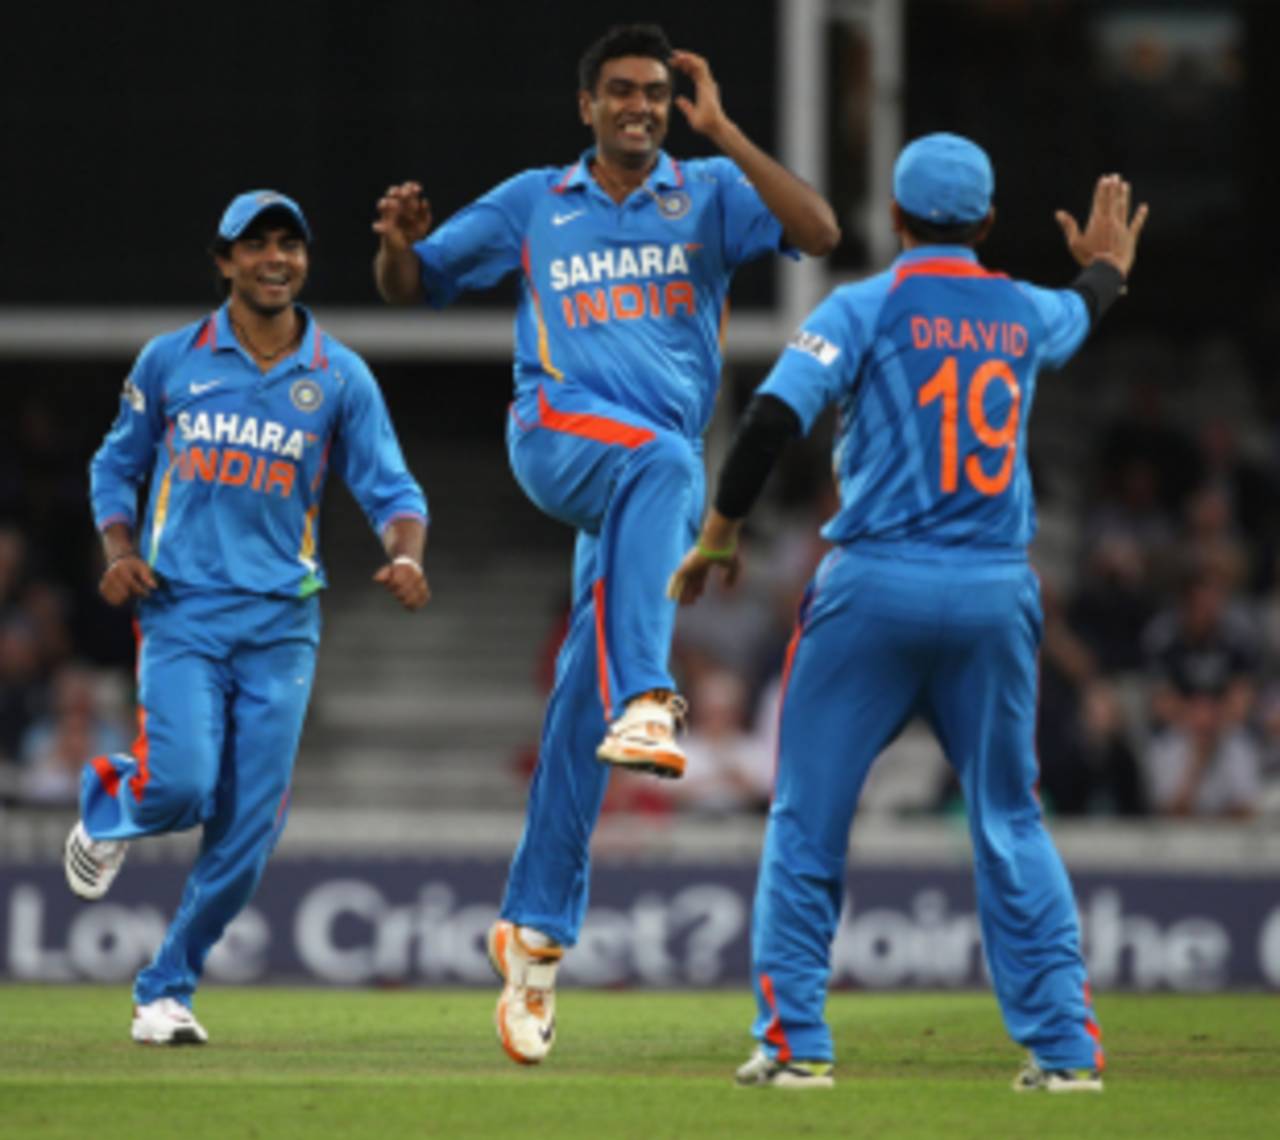 R Ashwin was Man of the Match for his tight bowling and calm batting&nbsp;&nbsp;&bull;&nbsp;&nbsp;Getty Images